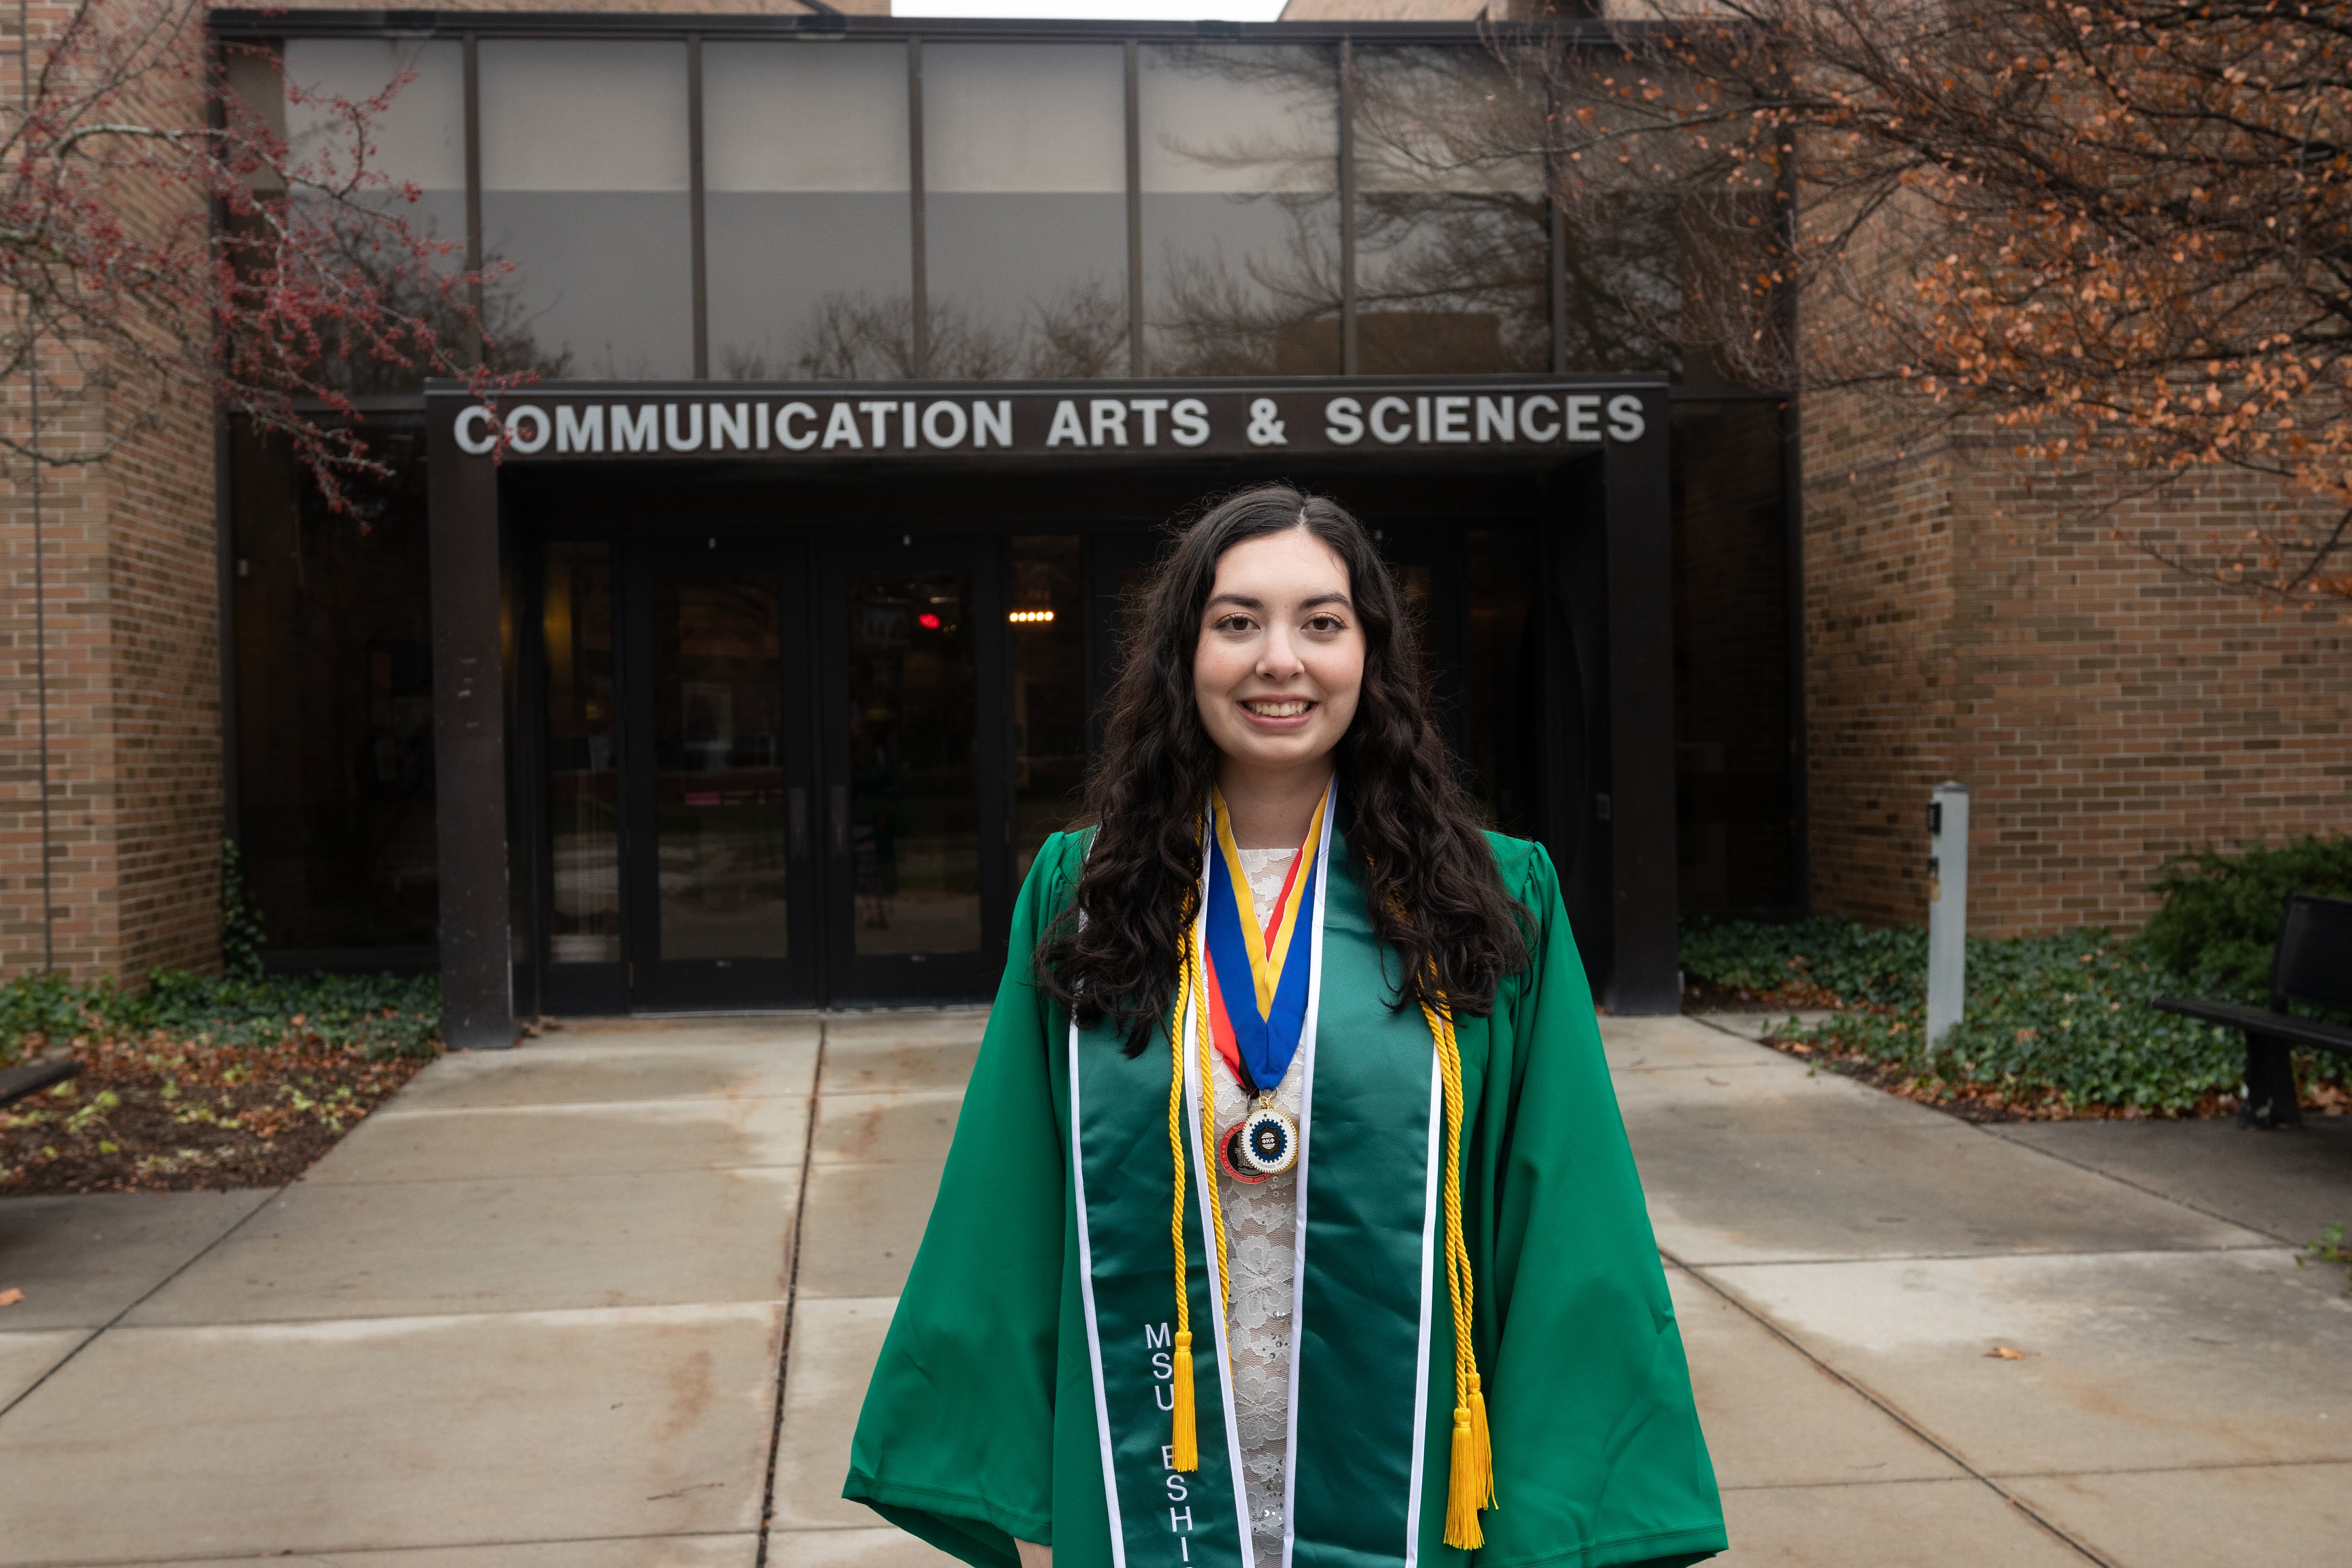 Gabrielle Sanchez in front of the Communication Arts and Sciences' building in green graduation regalia.